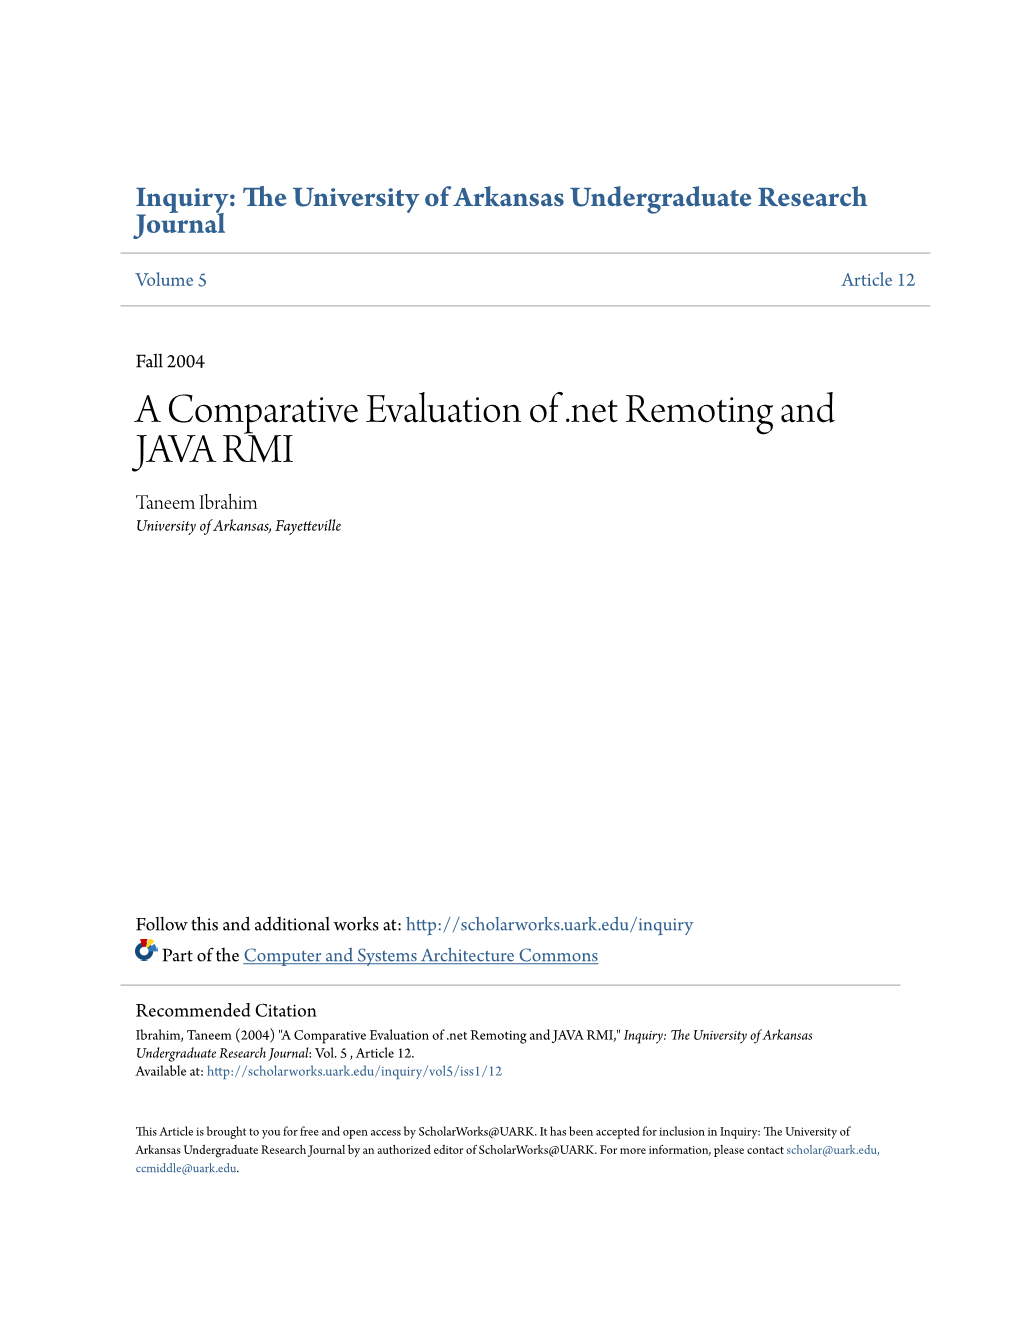 A Comparative Evaluation of .Net Remoting and JAVA RMI Taneem Ibrahim University of Arkansas, Fayetteville